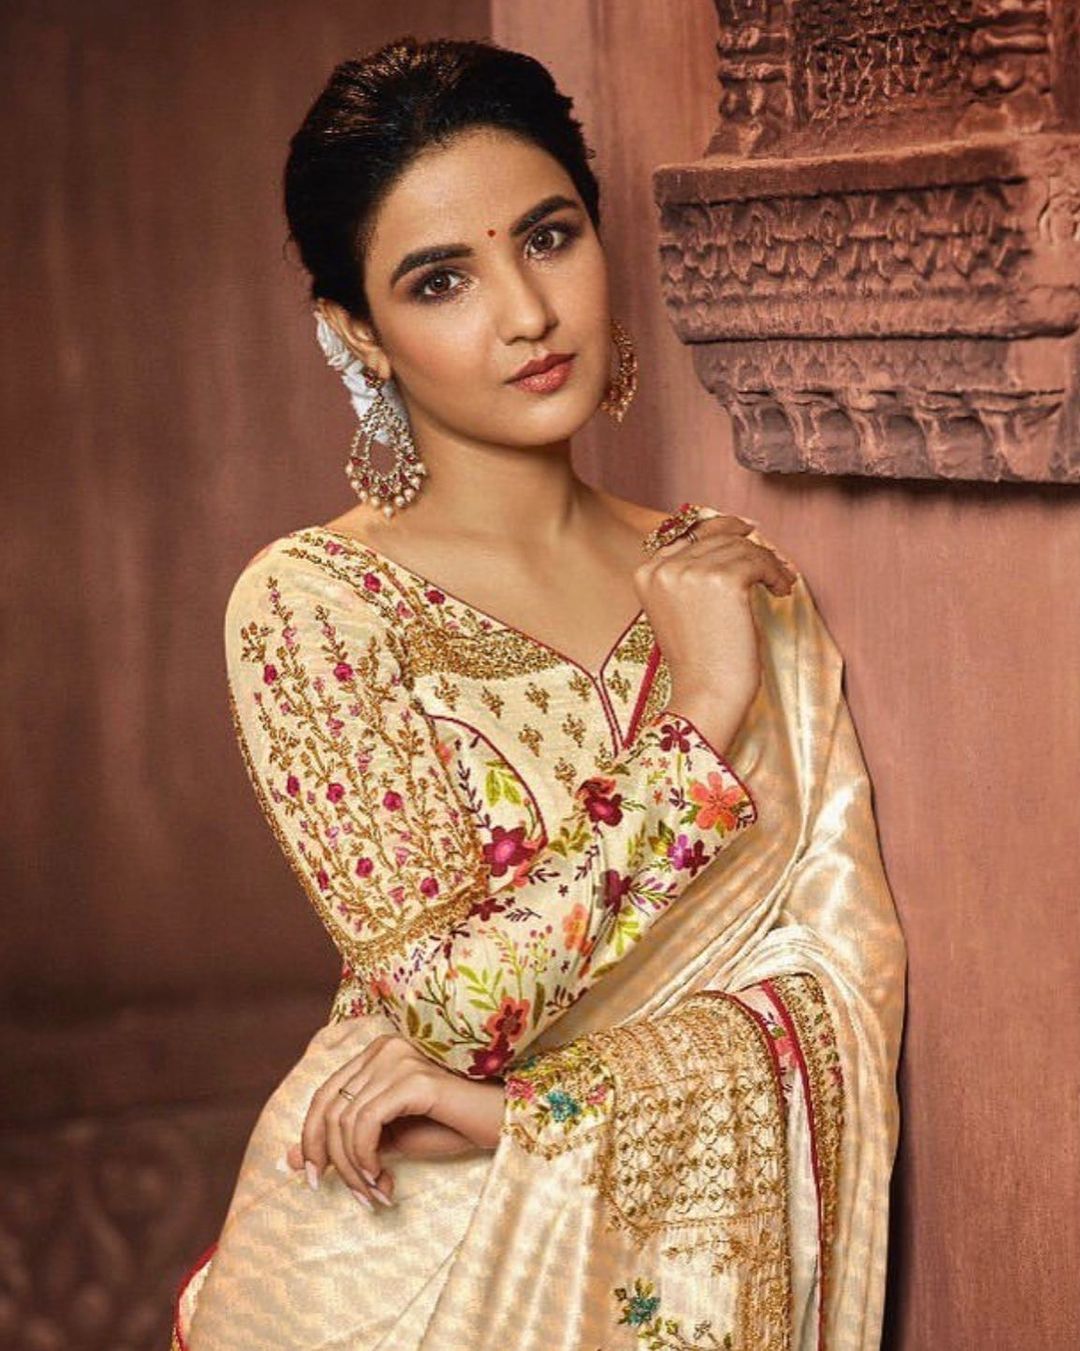 Jasmin Bhasin looks graceful in the golden saree with a floral blouse.